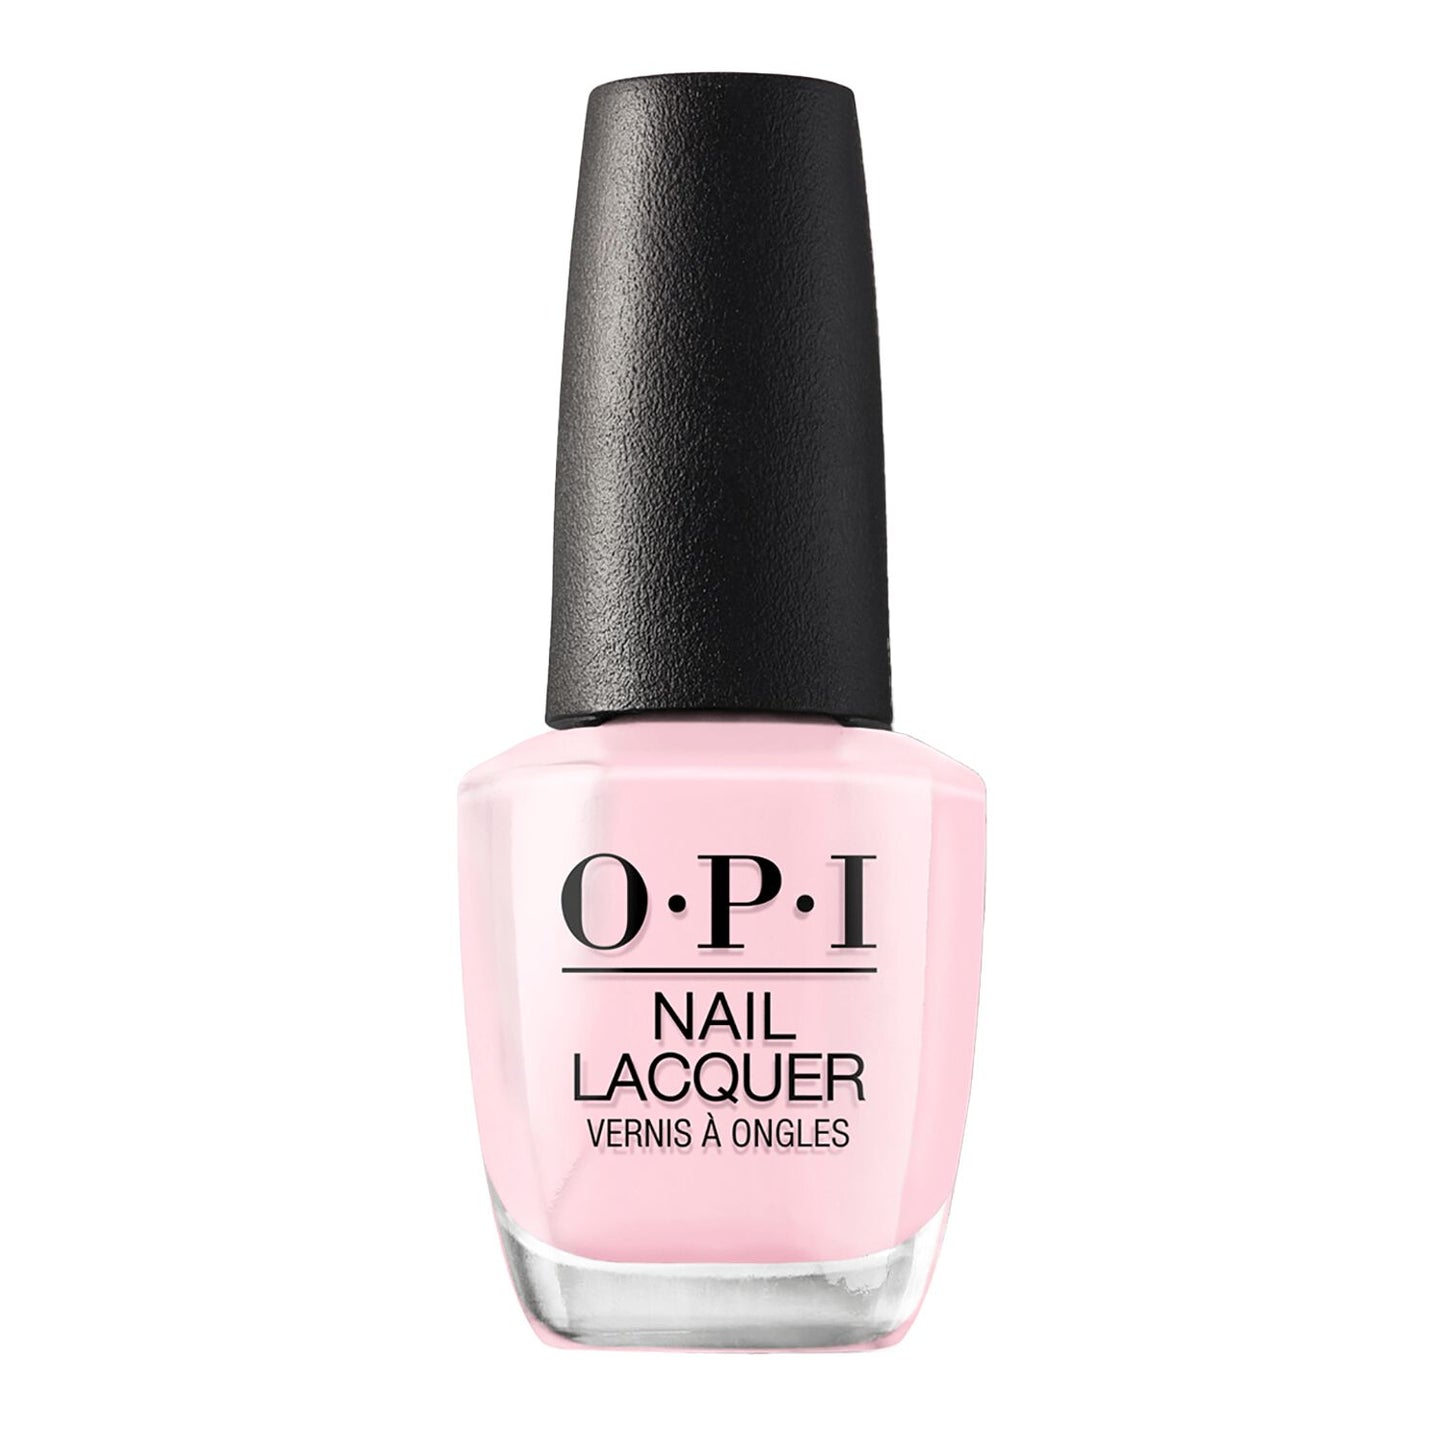 B56 Mod About You Nail Lacquer by OPI